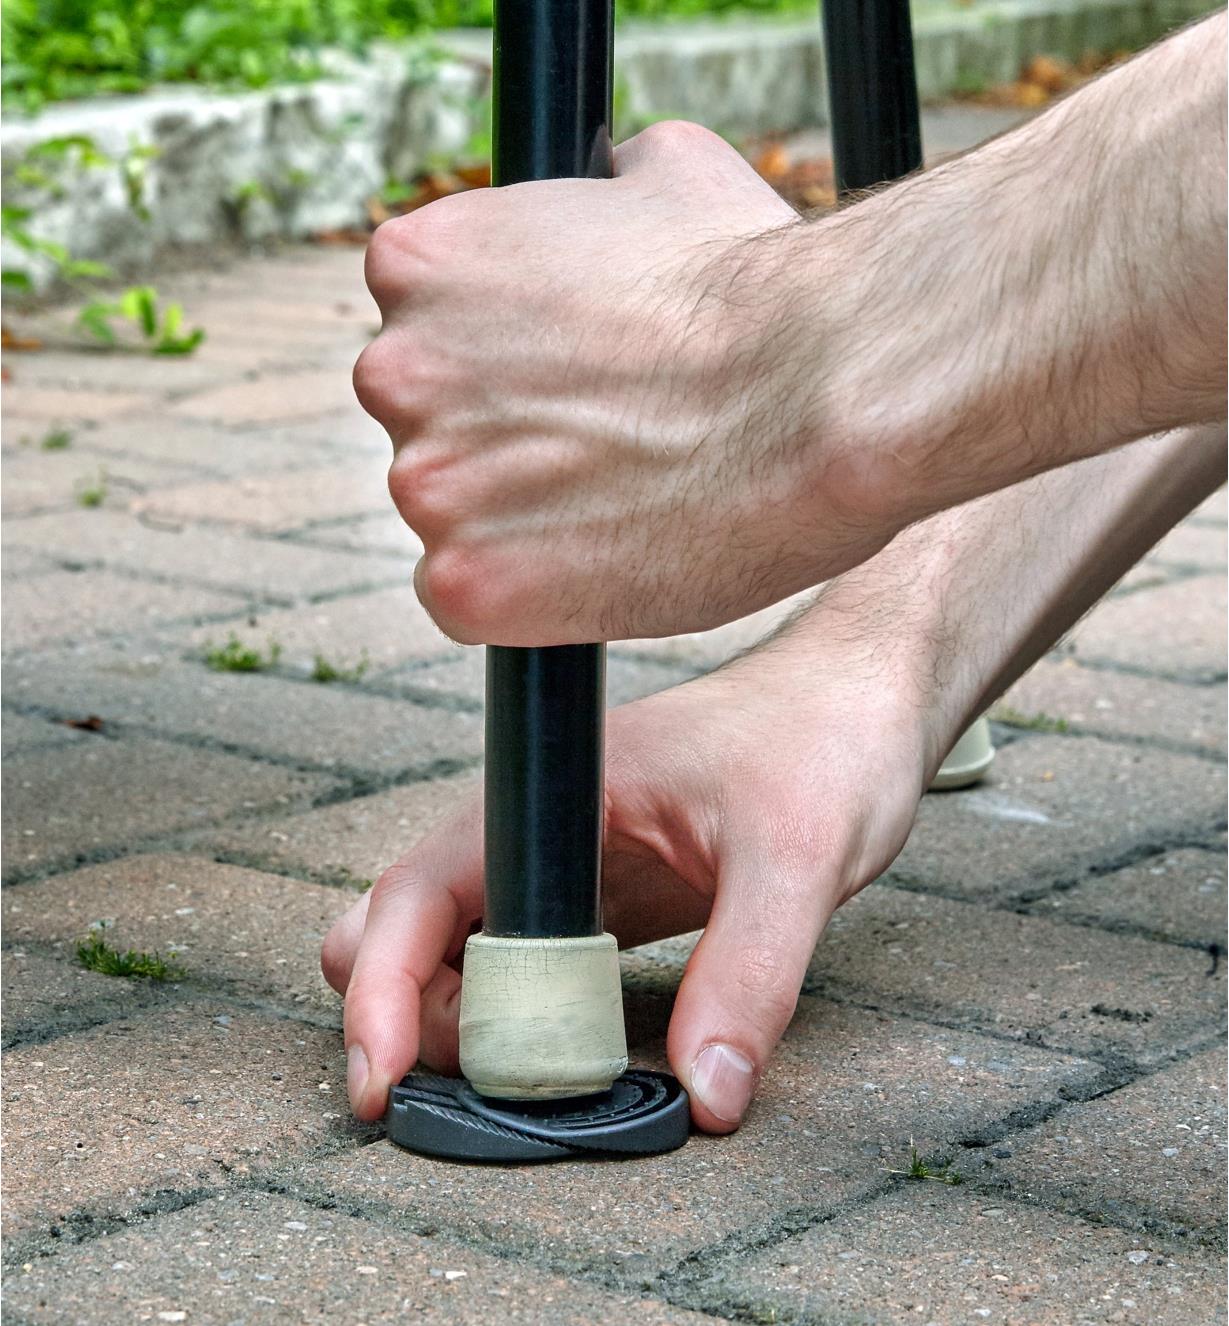 Wedging the adjustable furniture leveller under the leg of a patio chair